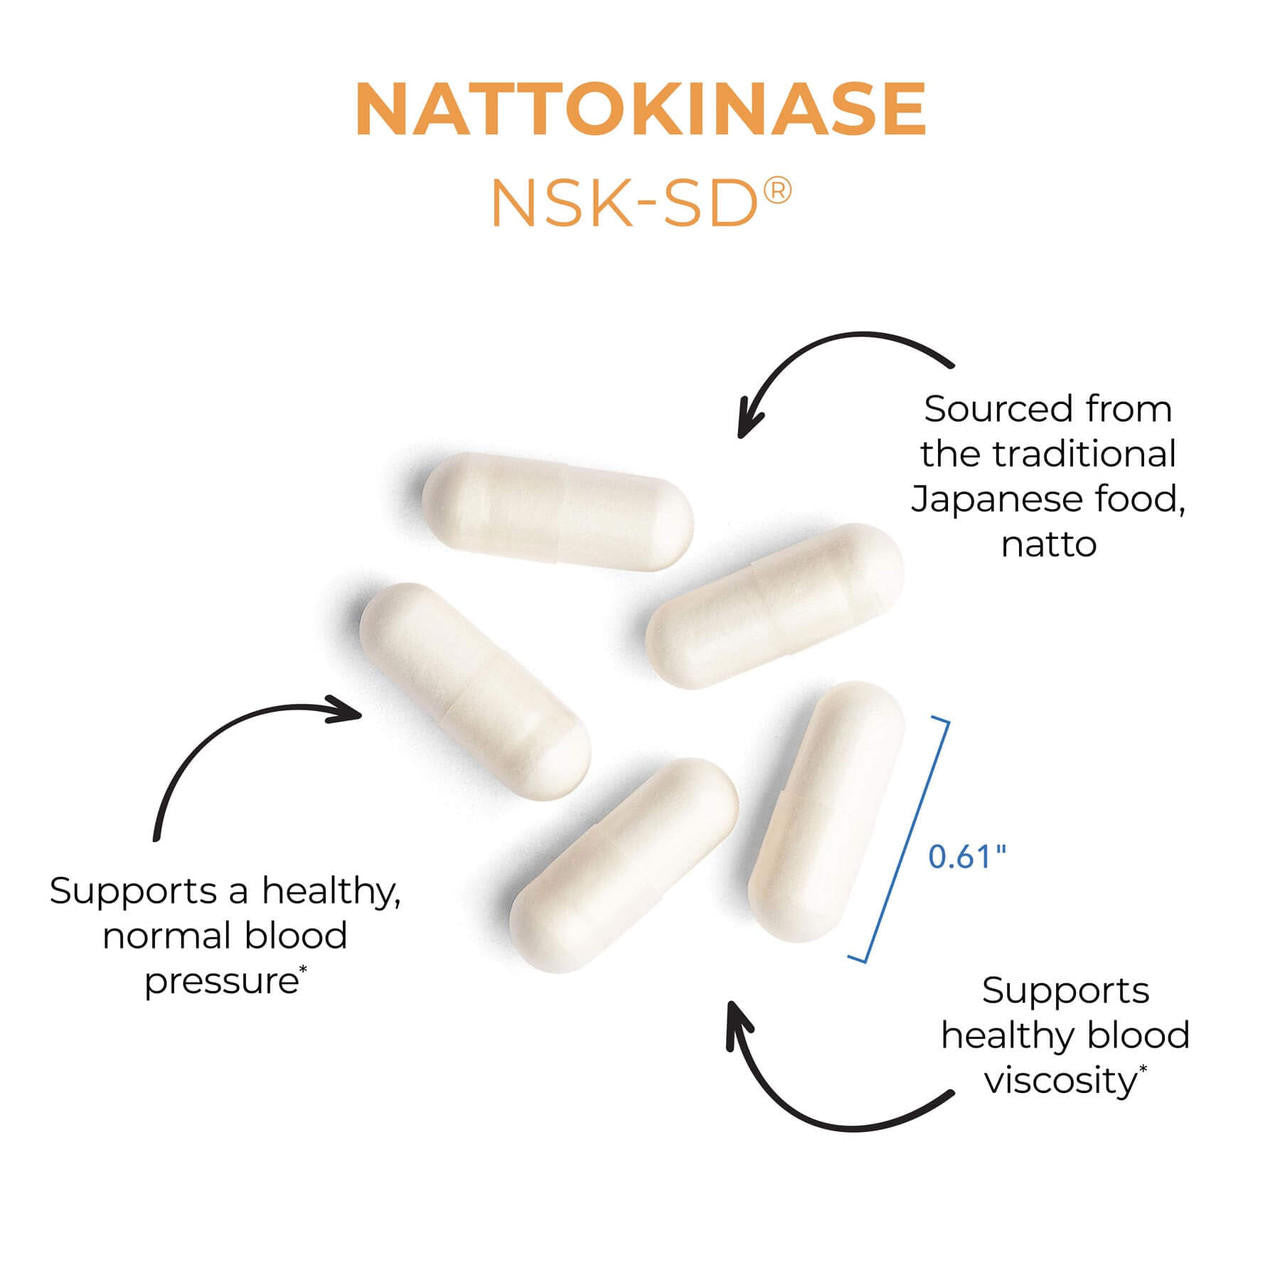 Allergy Research Group  Nattokinase 50mg Capsules